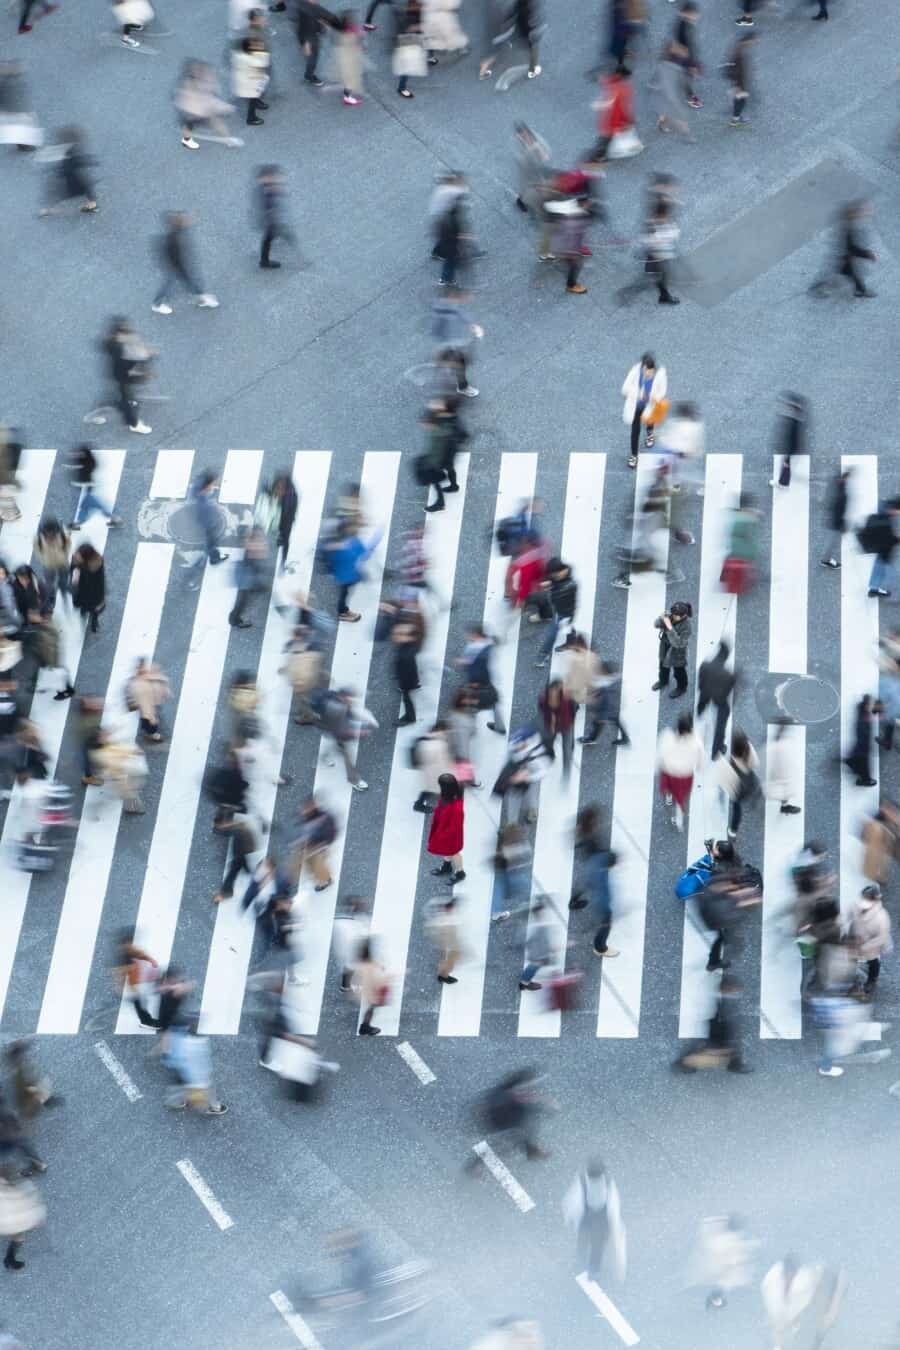 Shibuya Crossing, Tokyo Photography Locations - A Photographer's Guide to Photo Spots in Tokyo